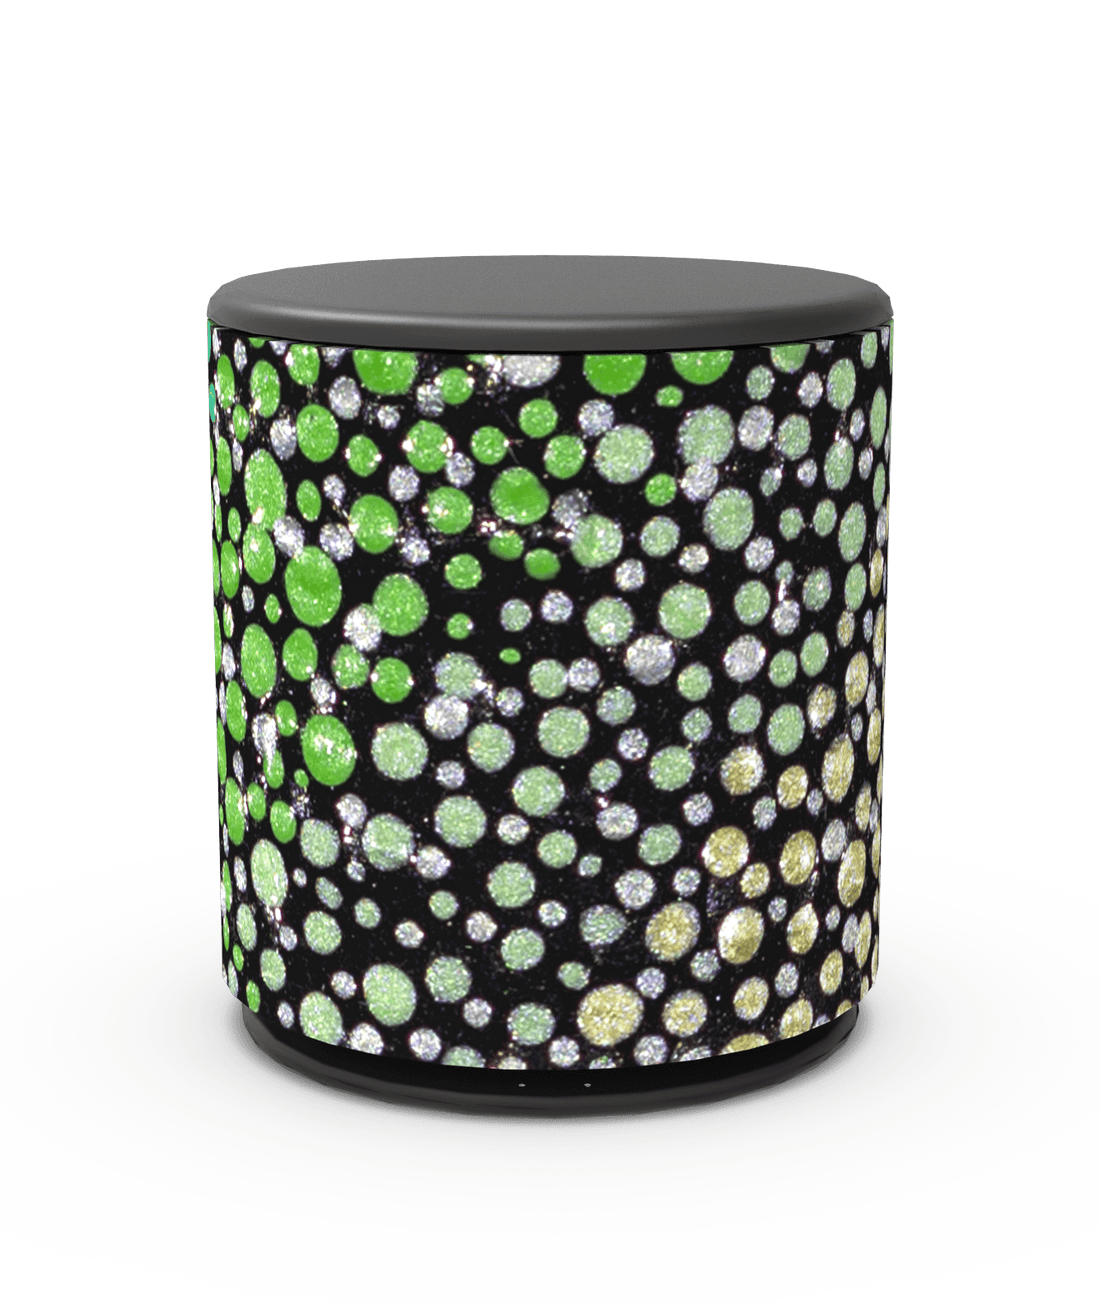 Skiniplay cover Amy Diener Green Stars for Bang & Olufsen Beoplay M5 speaker